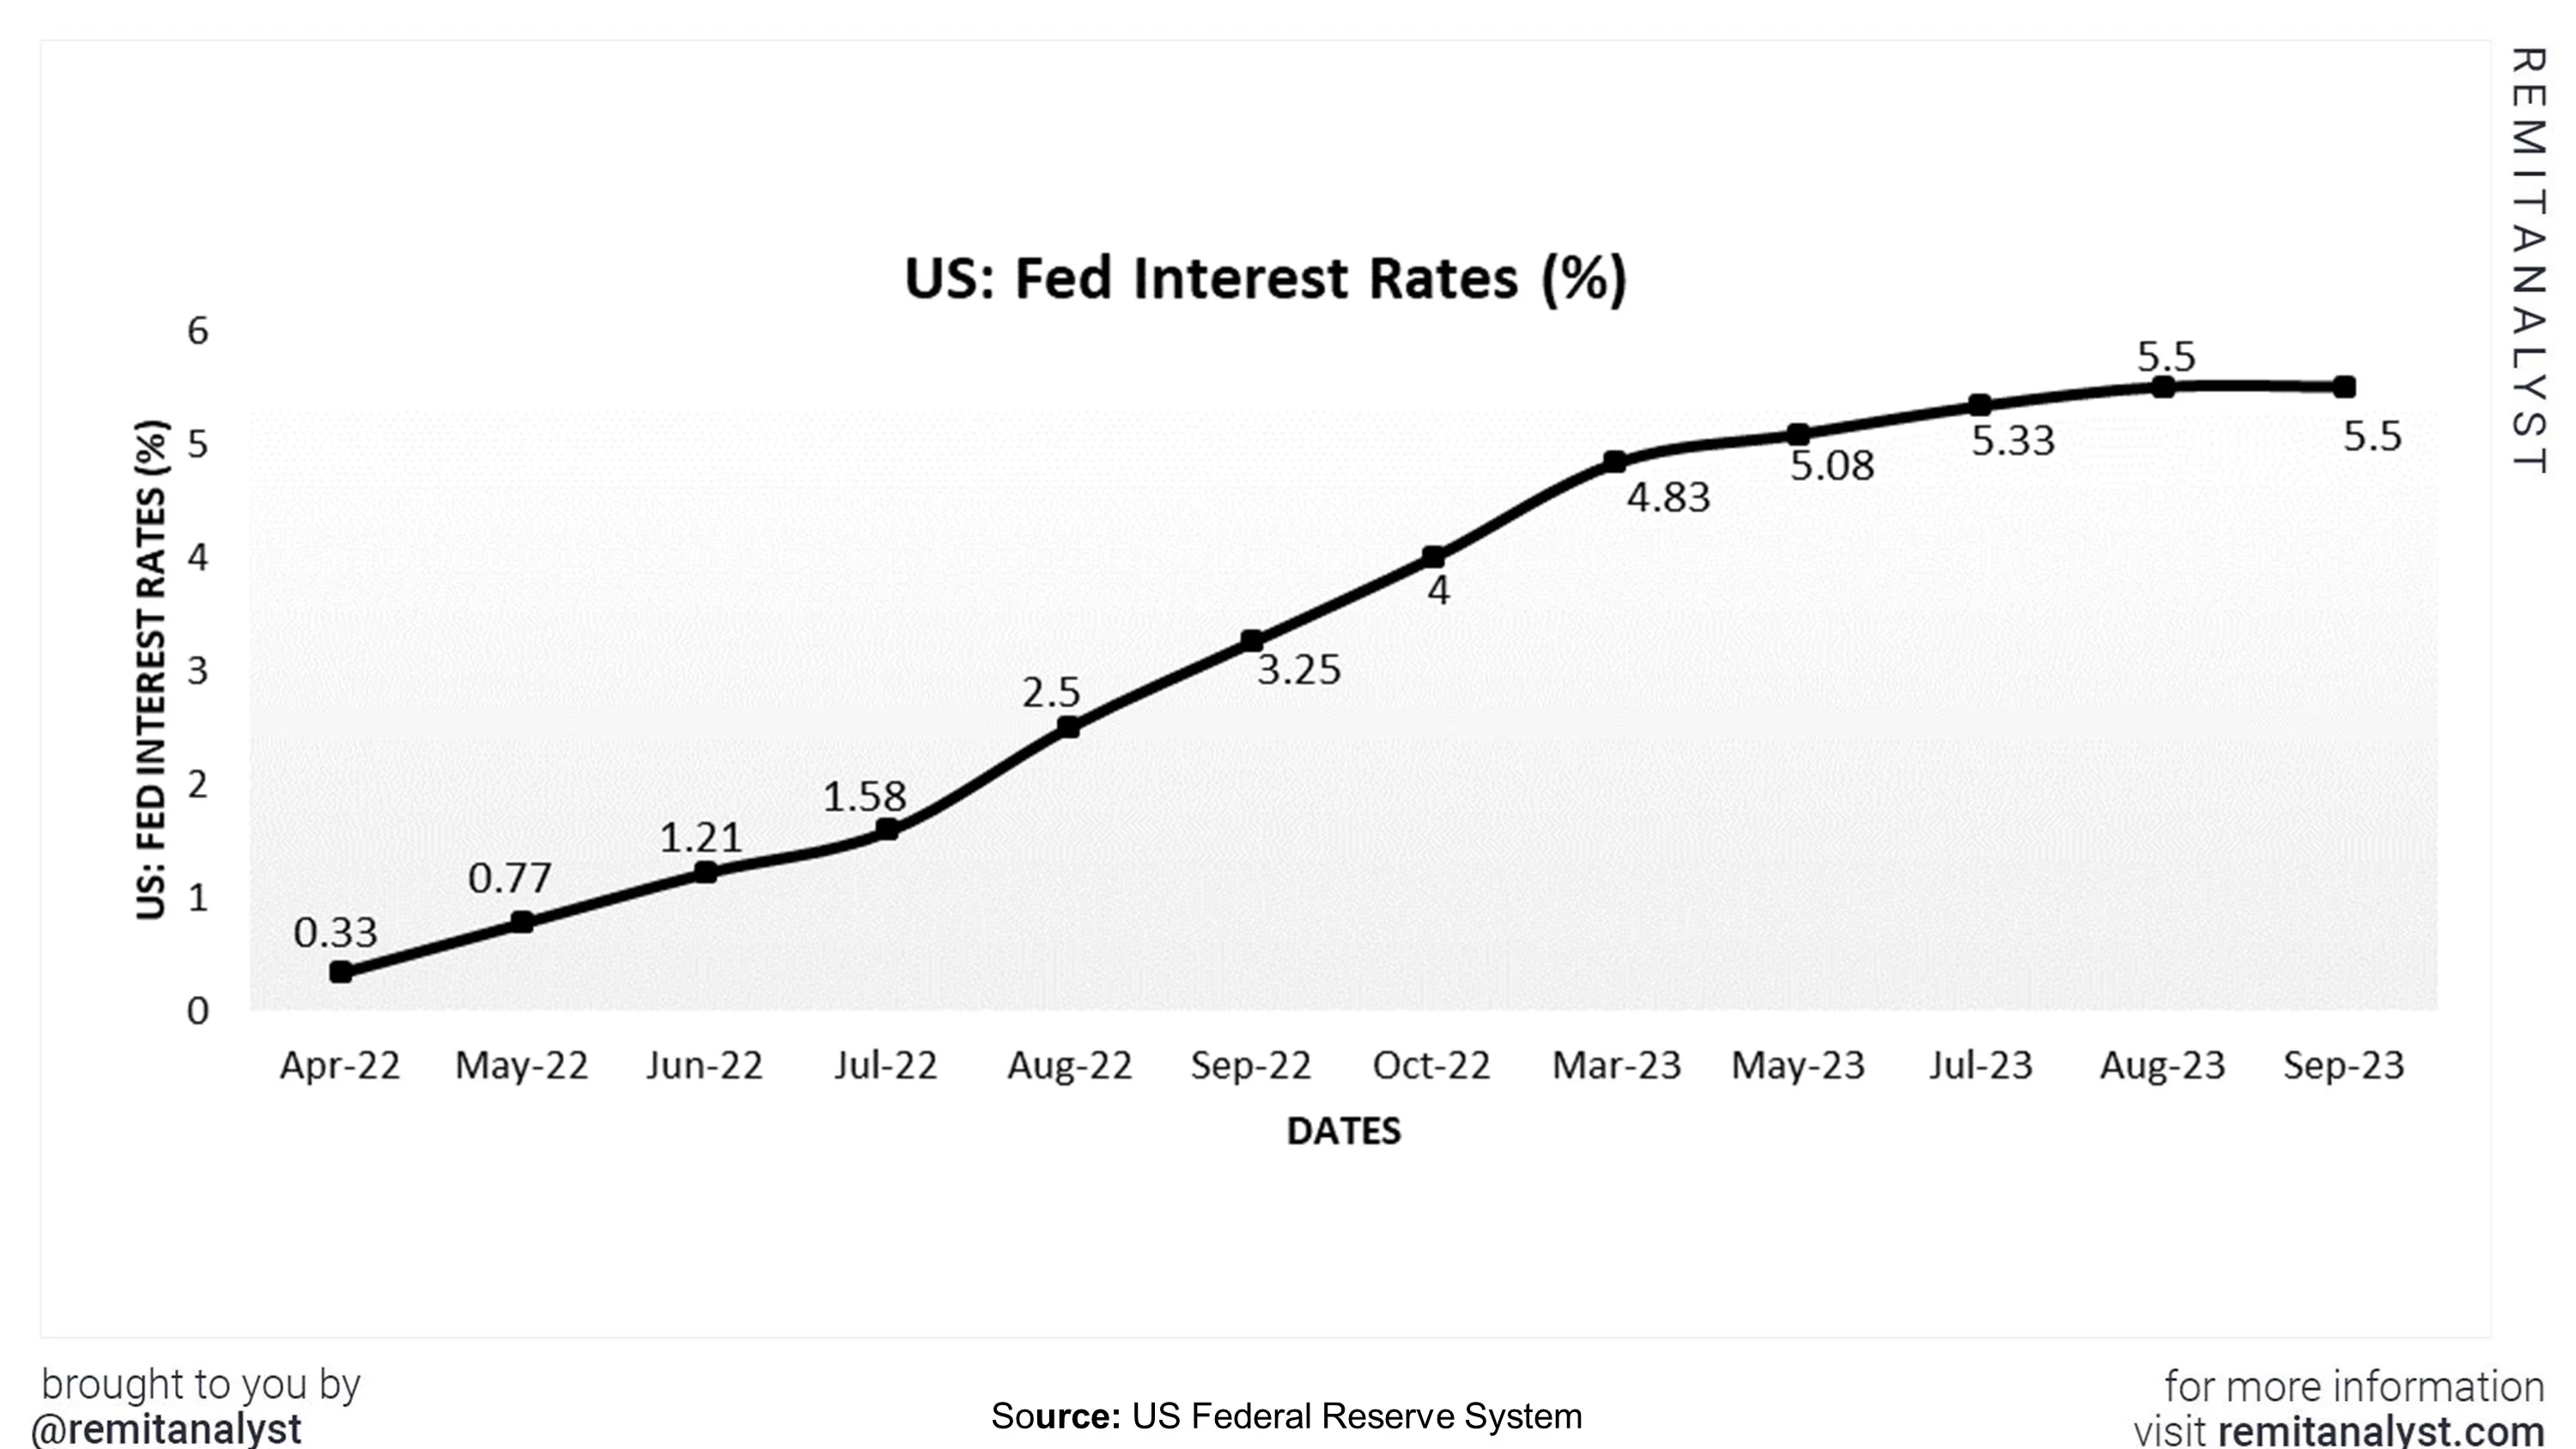 interest-rates-in-us-from-apr-2021-to-sep-2023